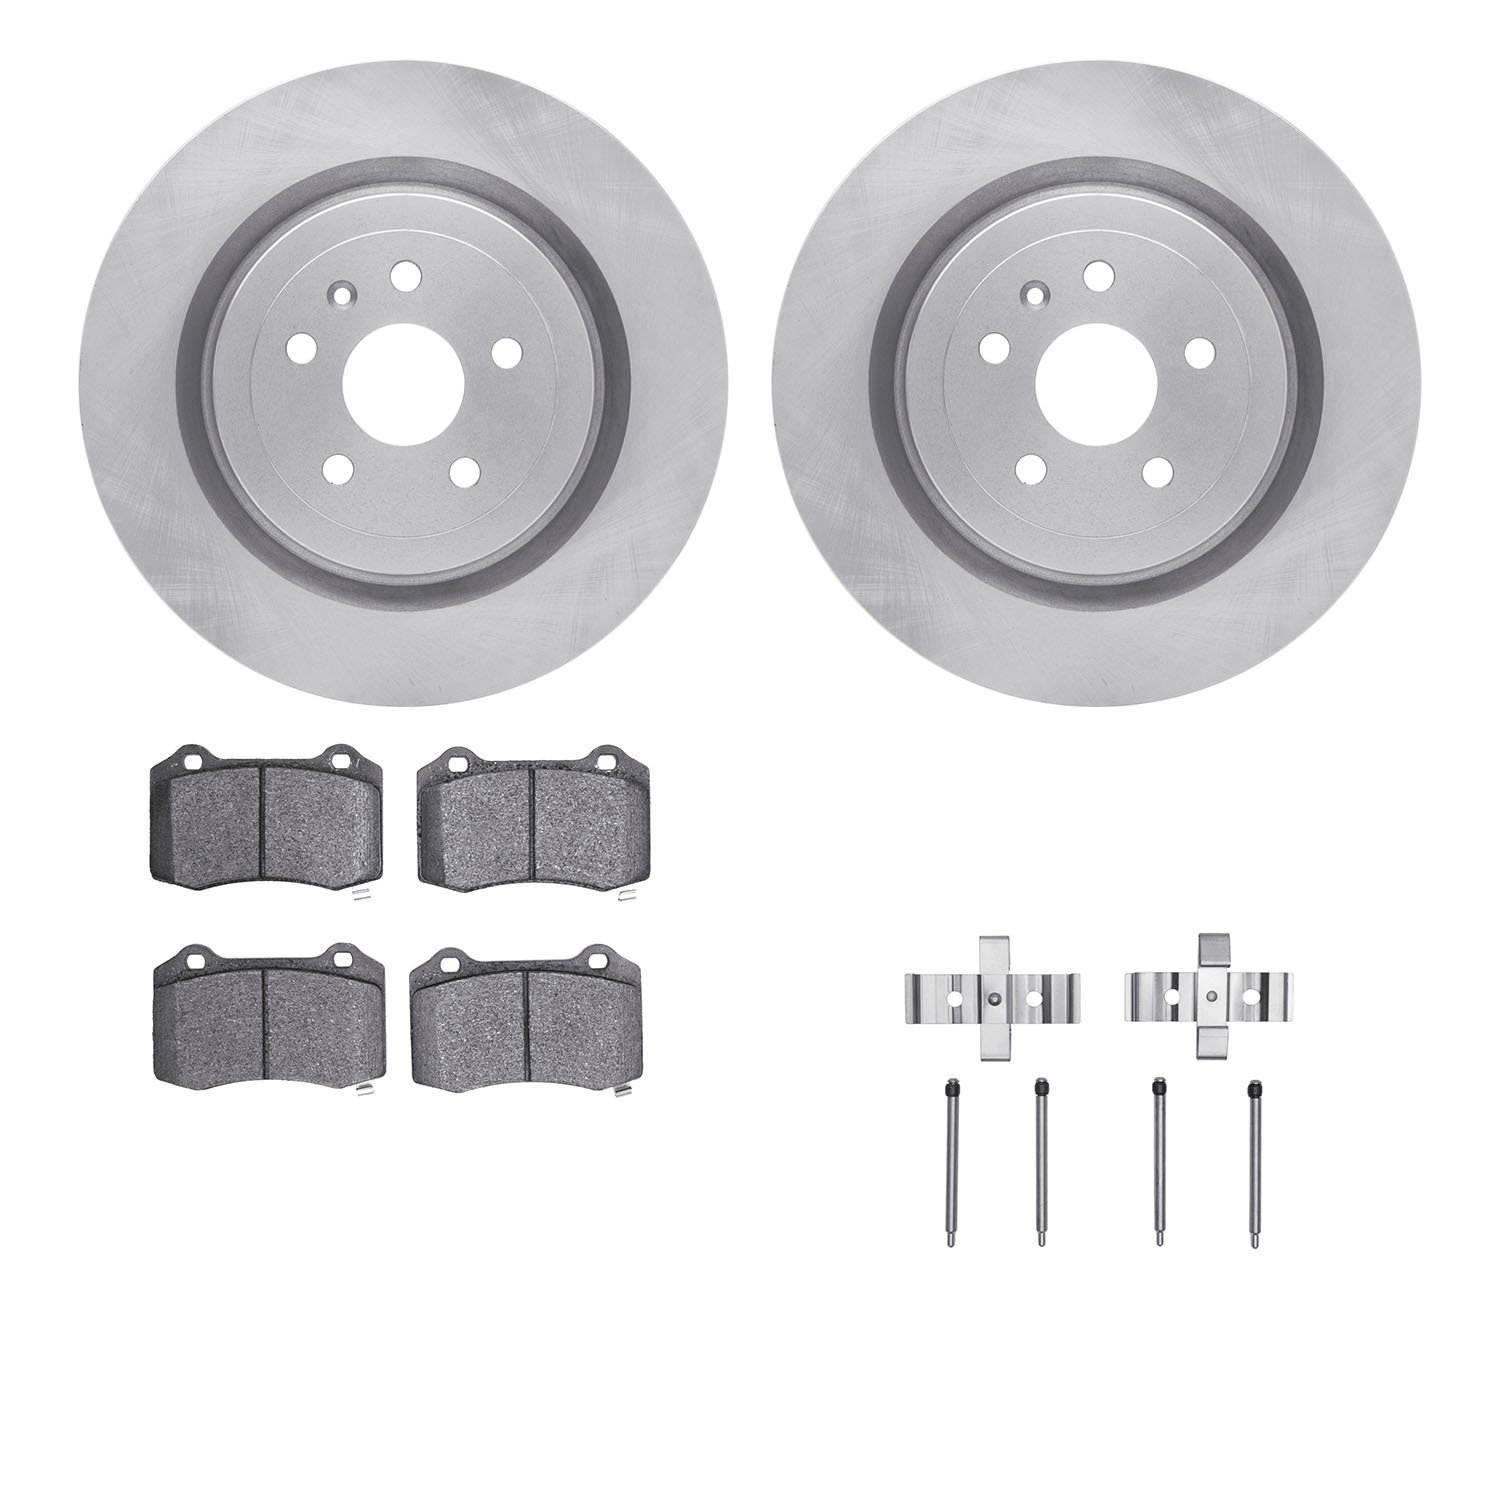 6412-47022 Brake Rotors with Ultimate-Duty Brake Pads Kit & Hardware, Fits Select GM, Position: Rear